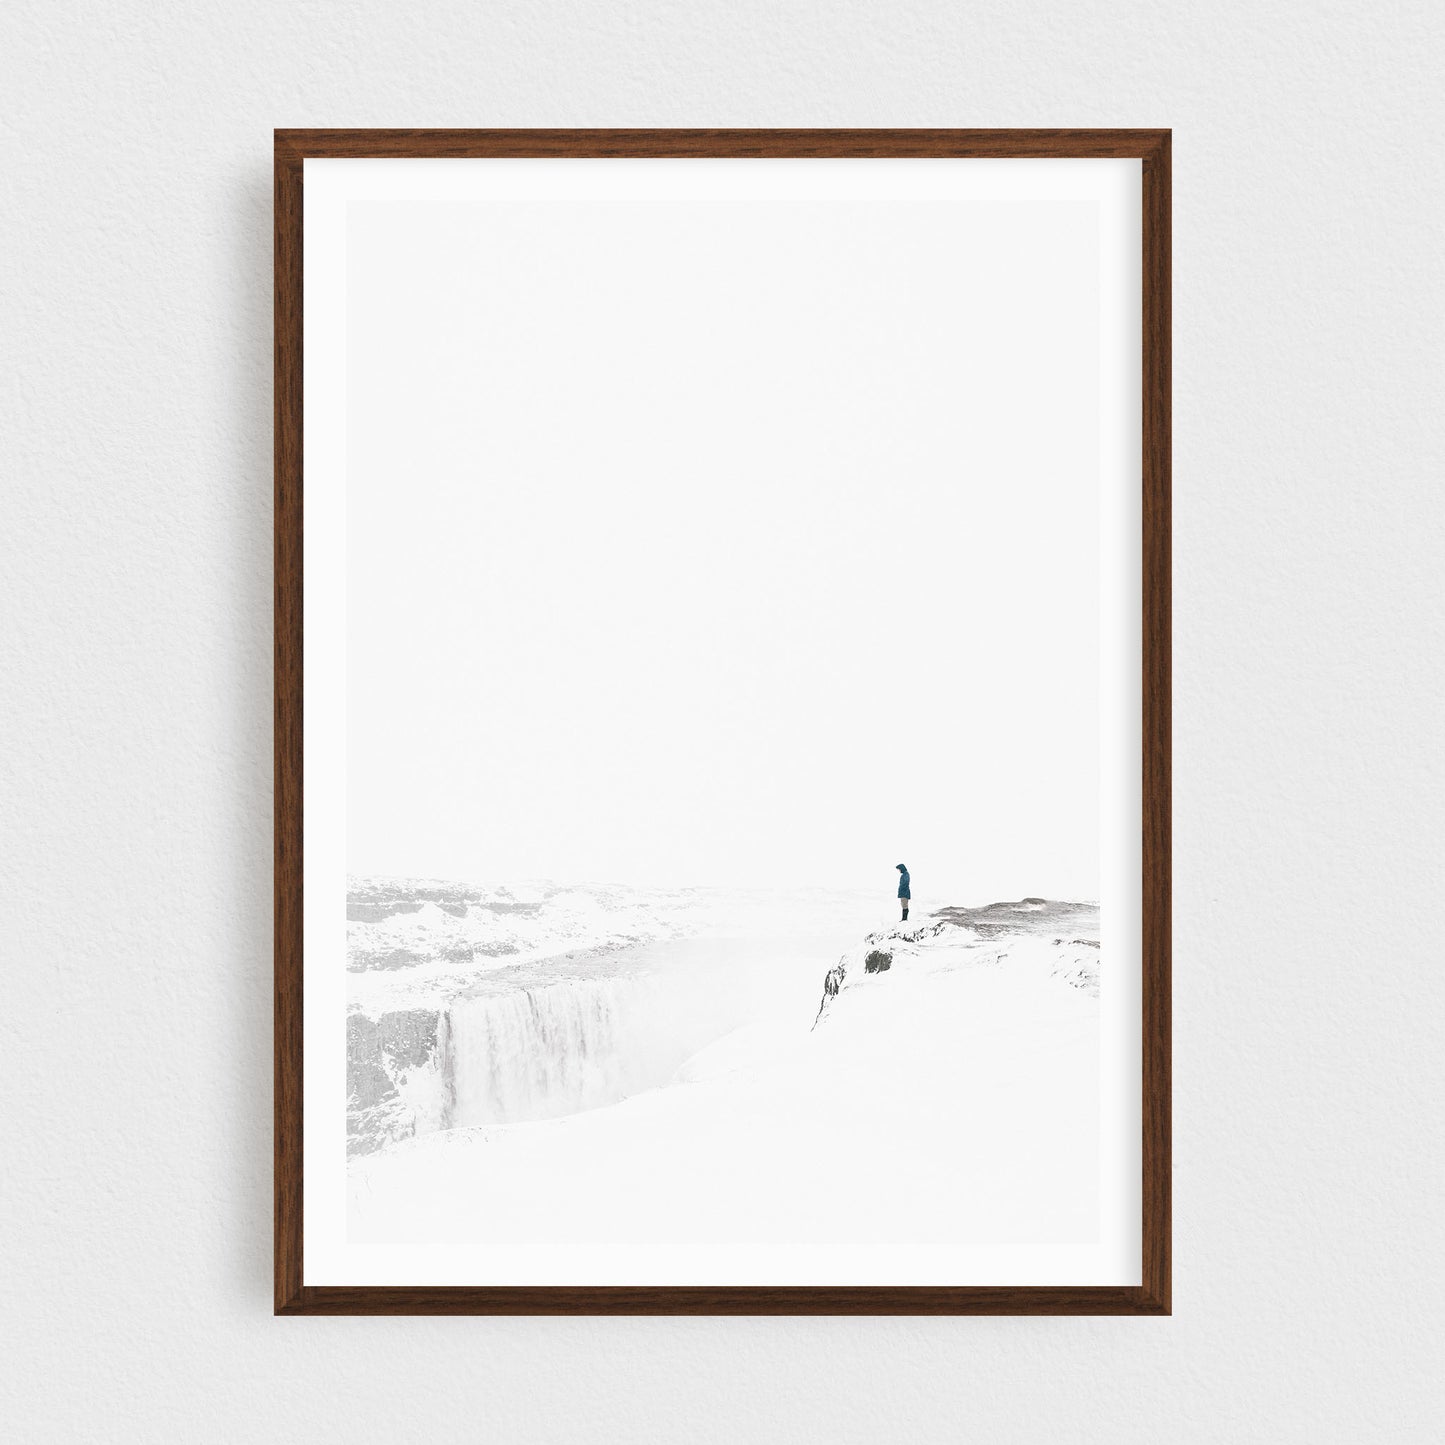 Iceland fine art photography print featuring Dettifoss waterfall in winter, in a walnut frame